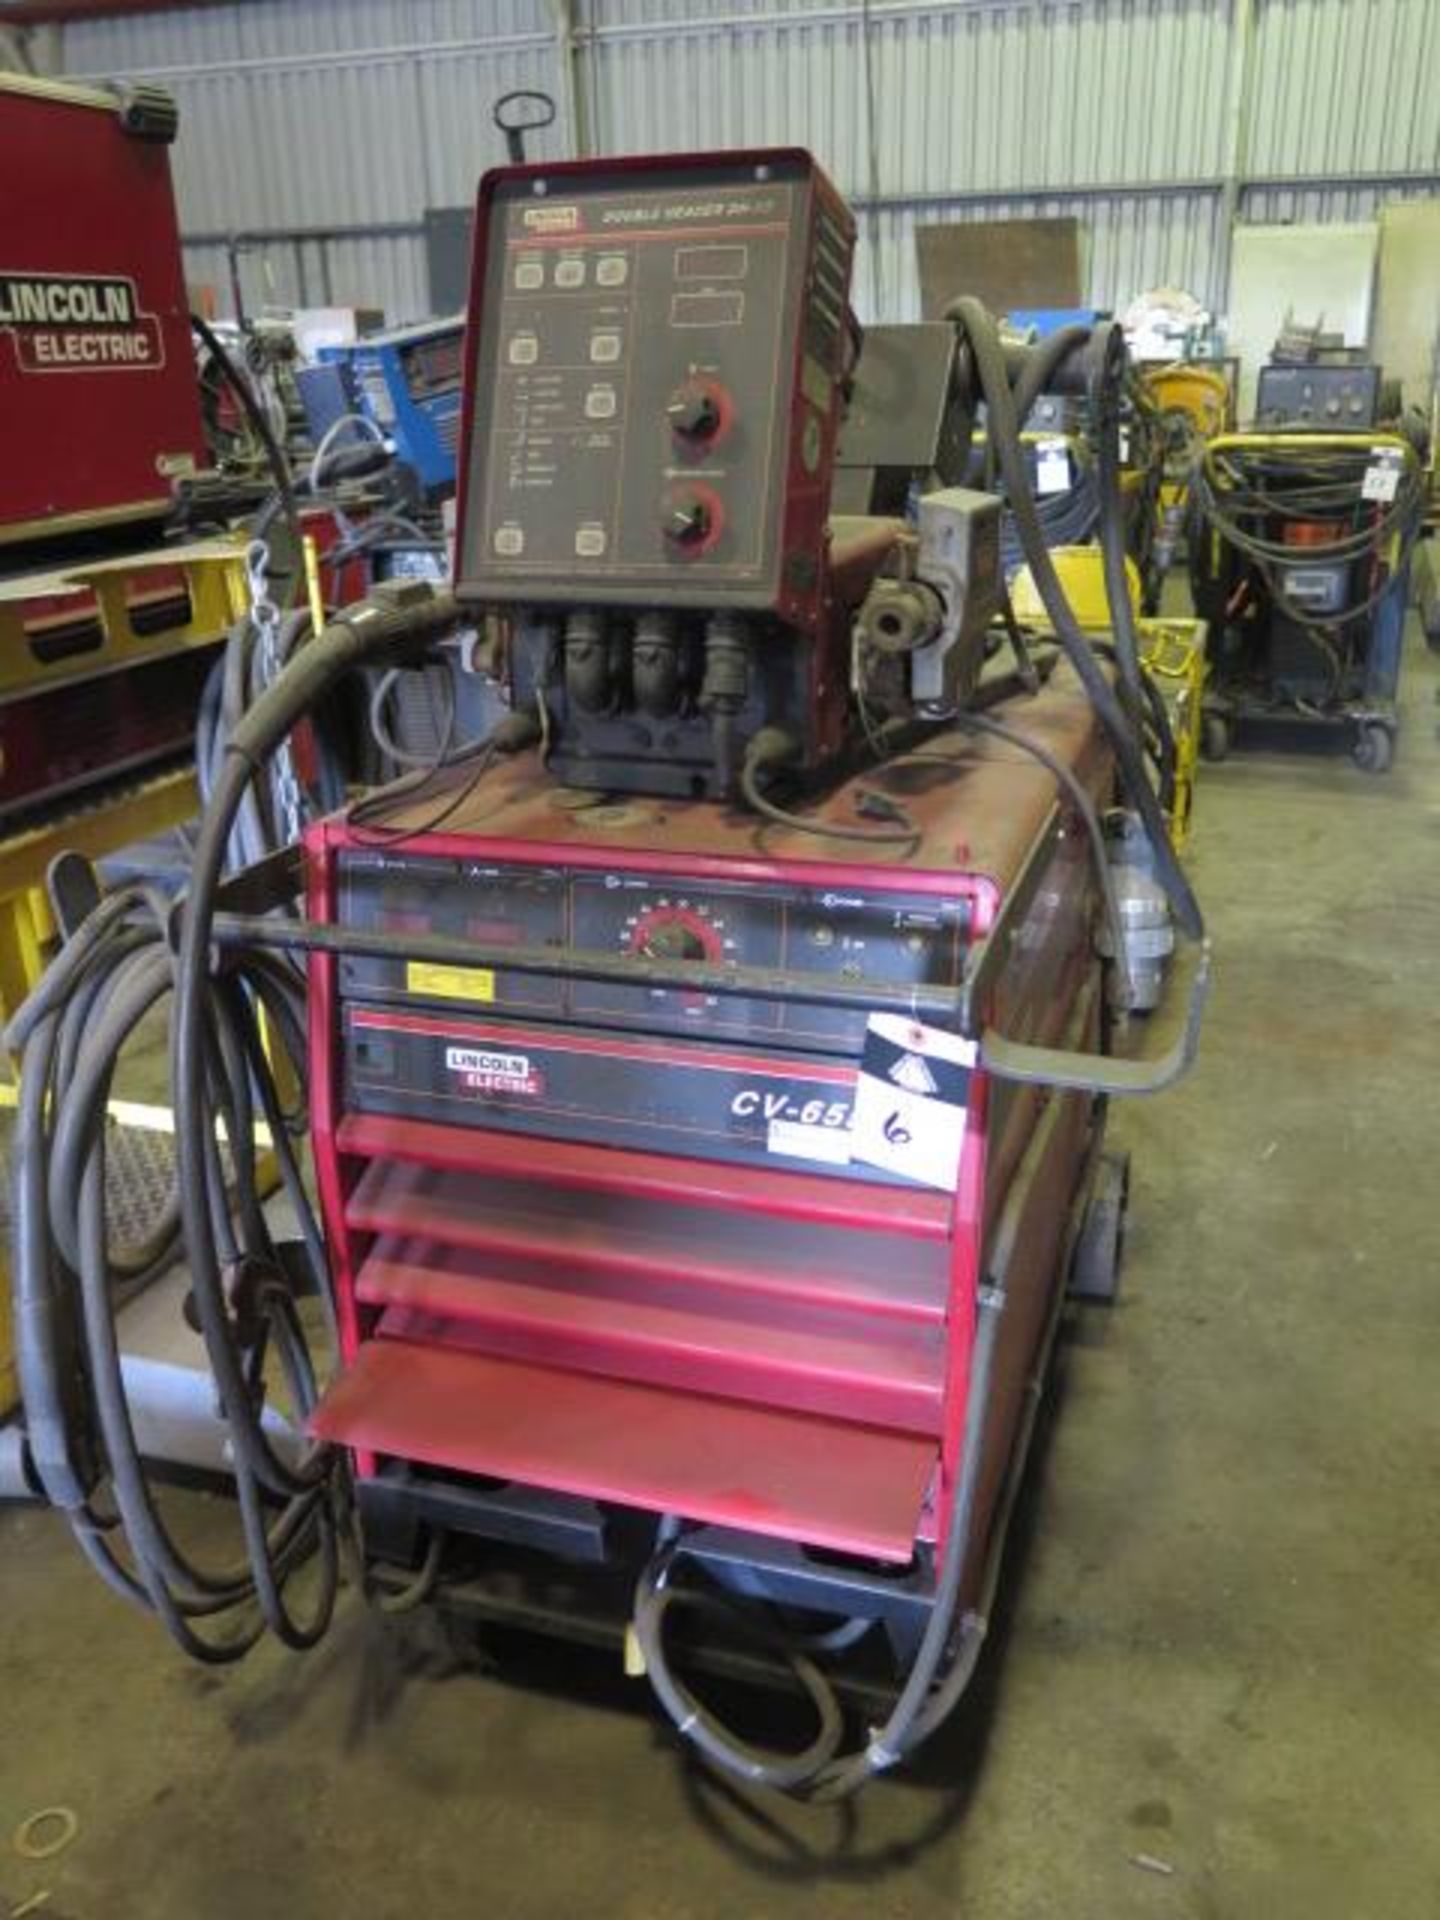 Lincoln CV-655 Arc Welding Power Source w/ Lincoln Double Header DH-10 Dual Wire Feed (SOLD AS-